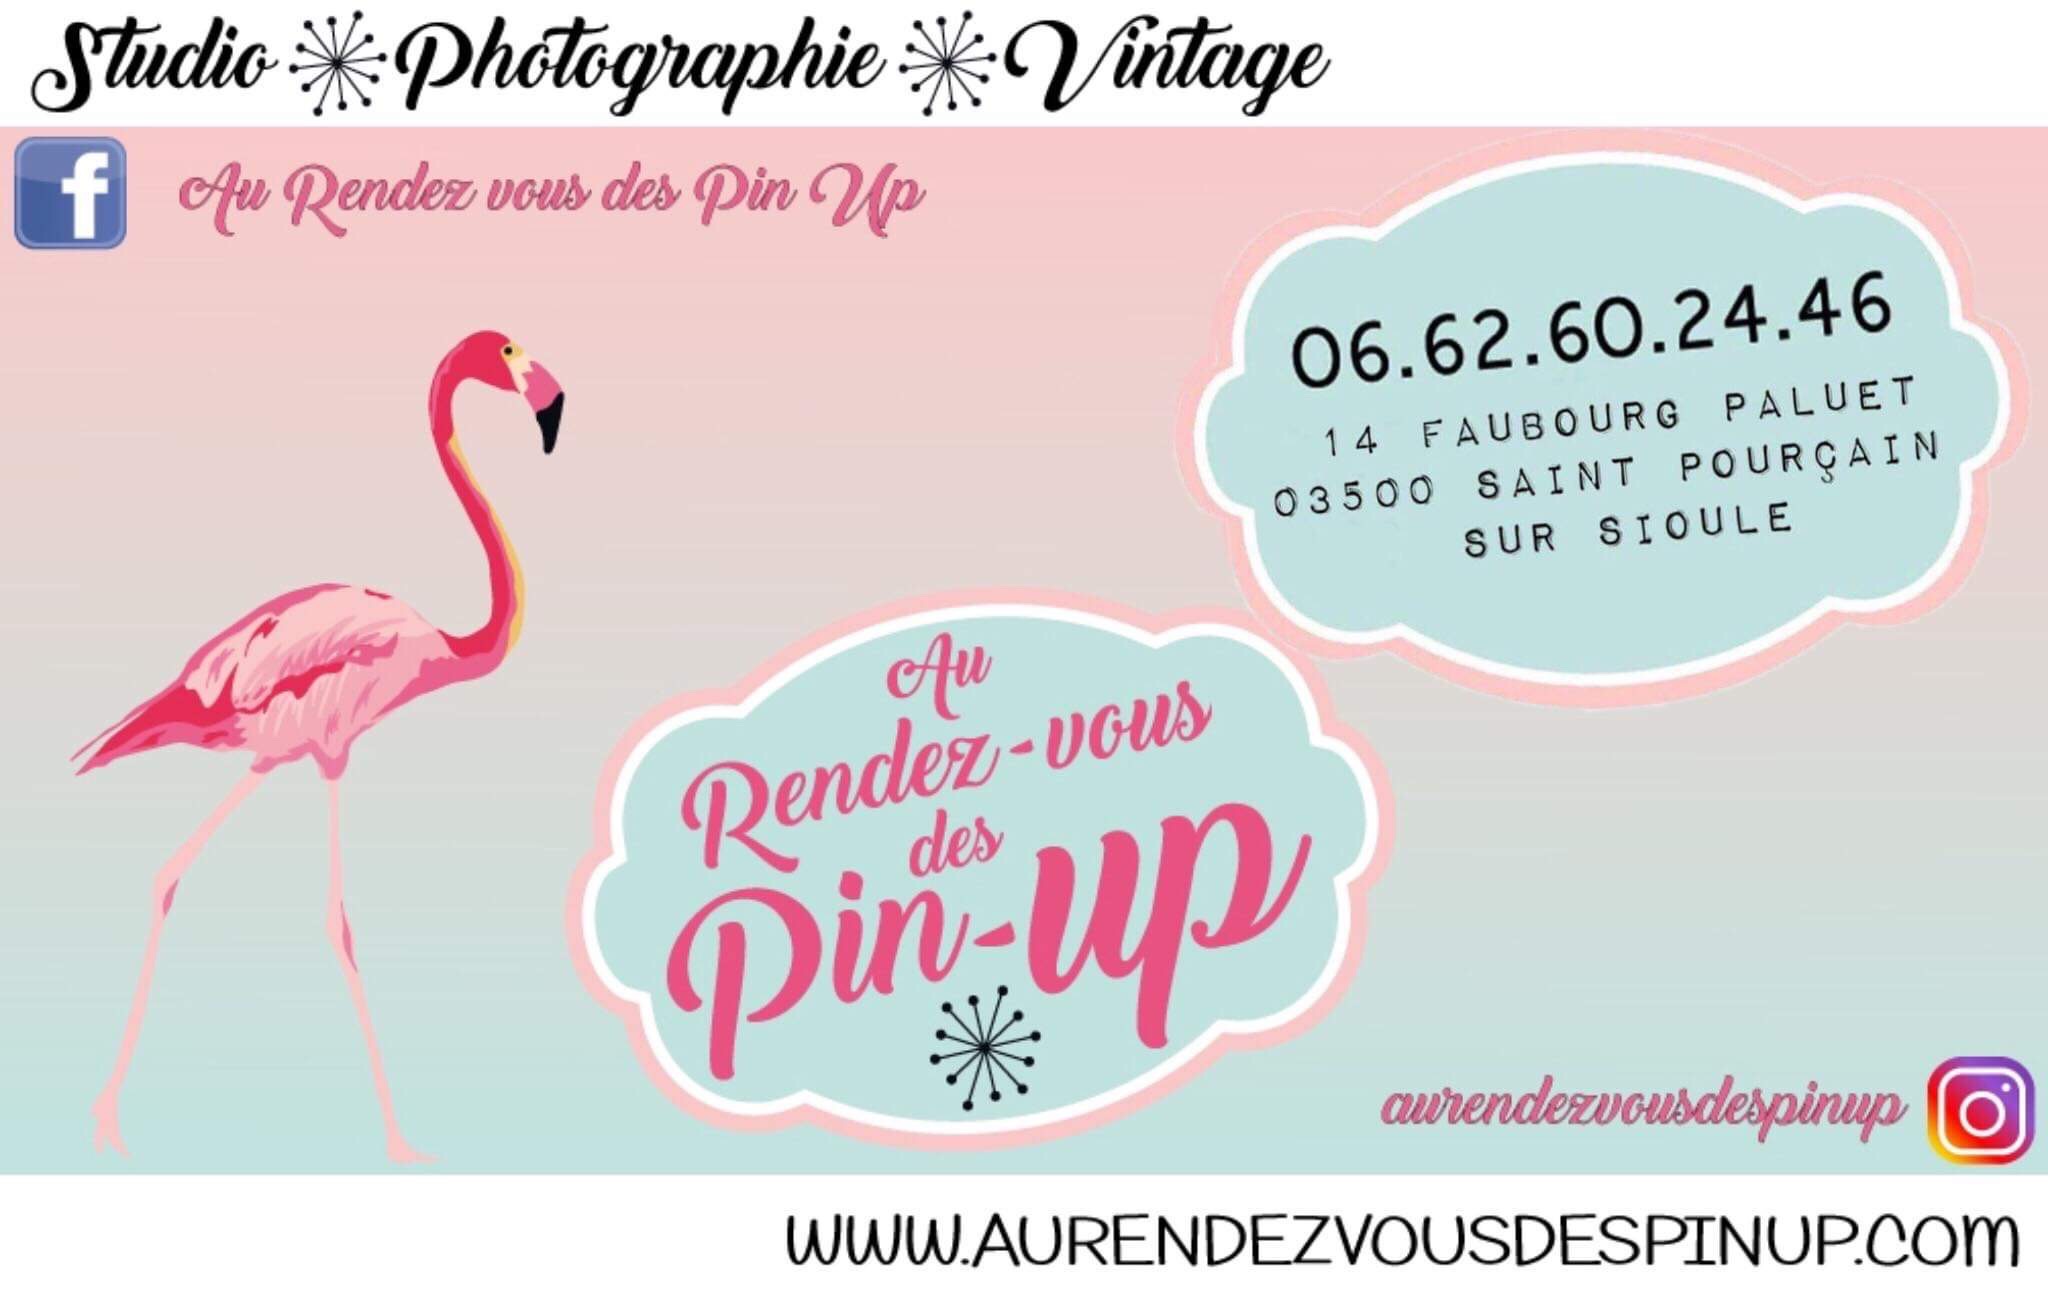 Site rencontre pin up